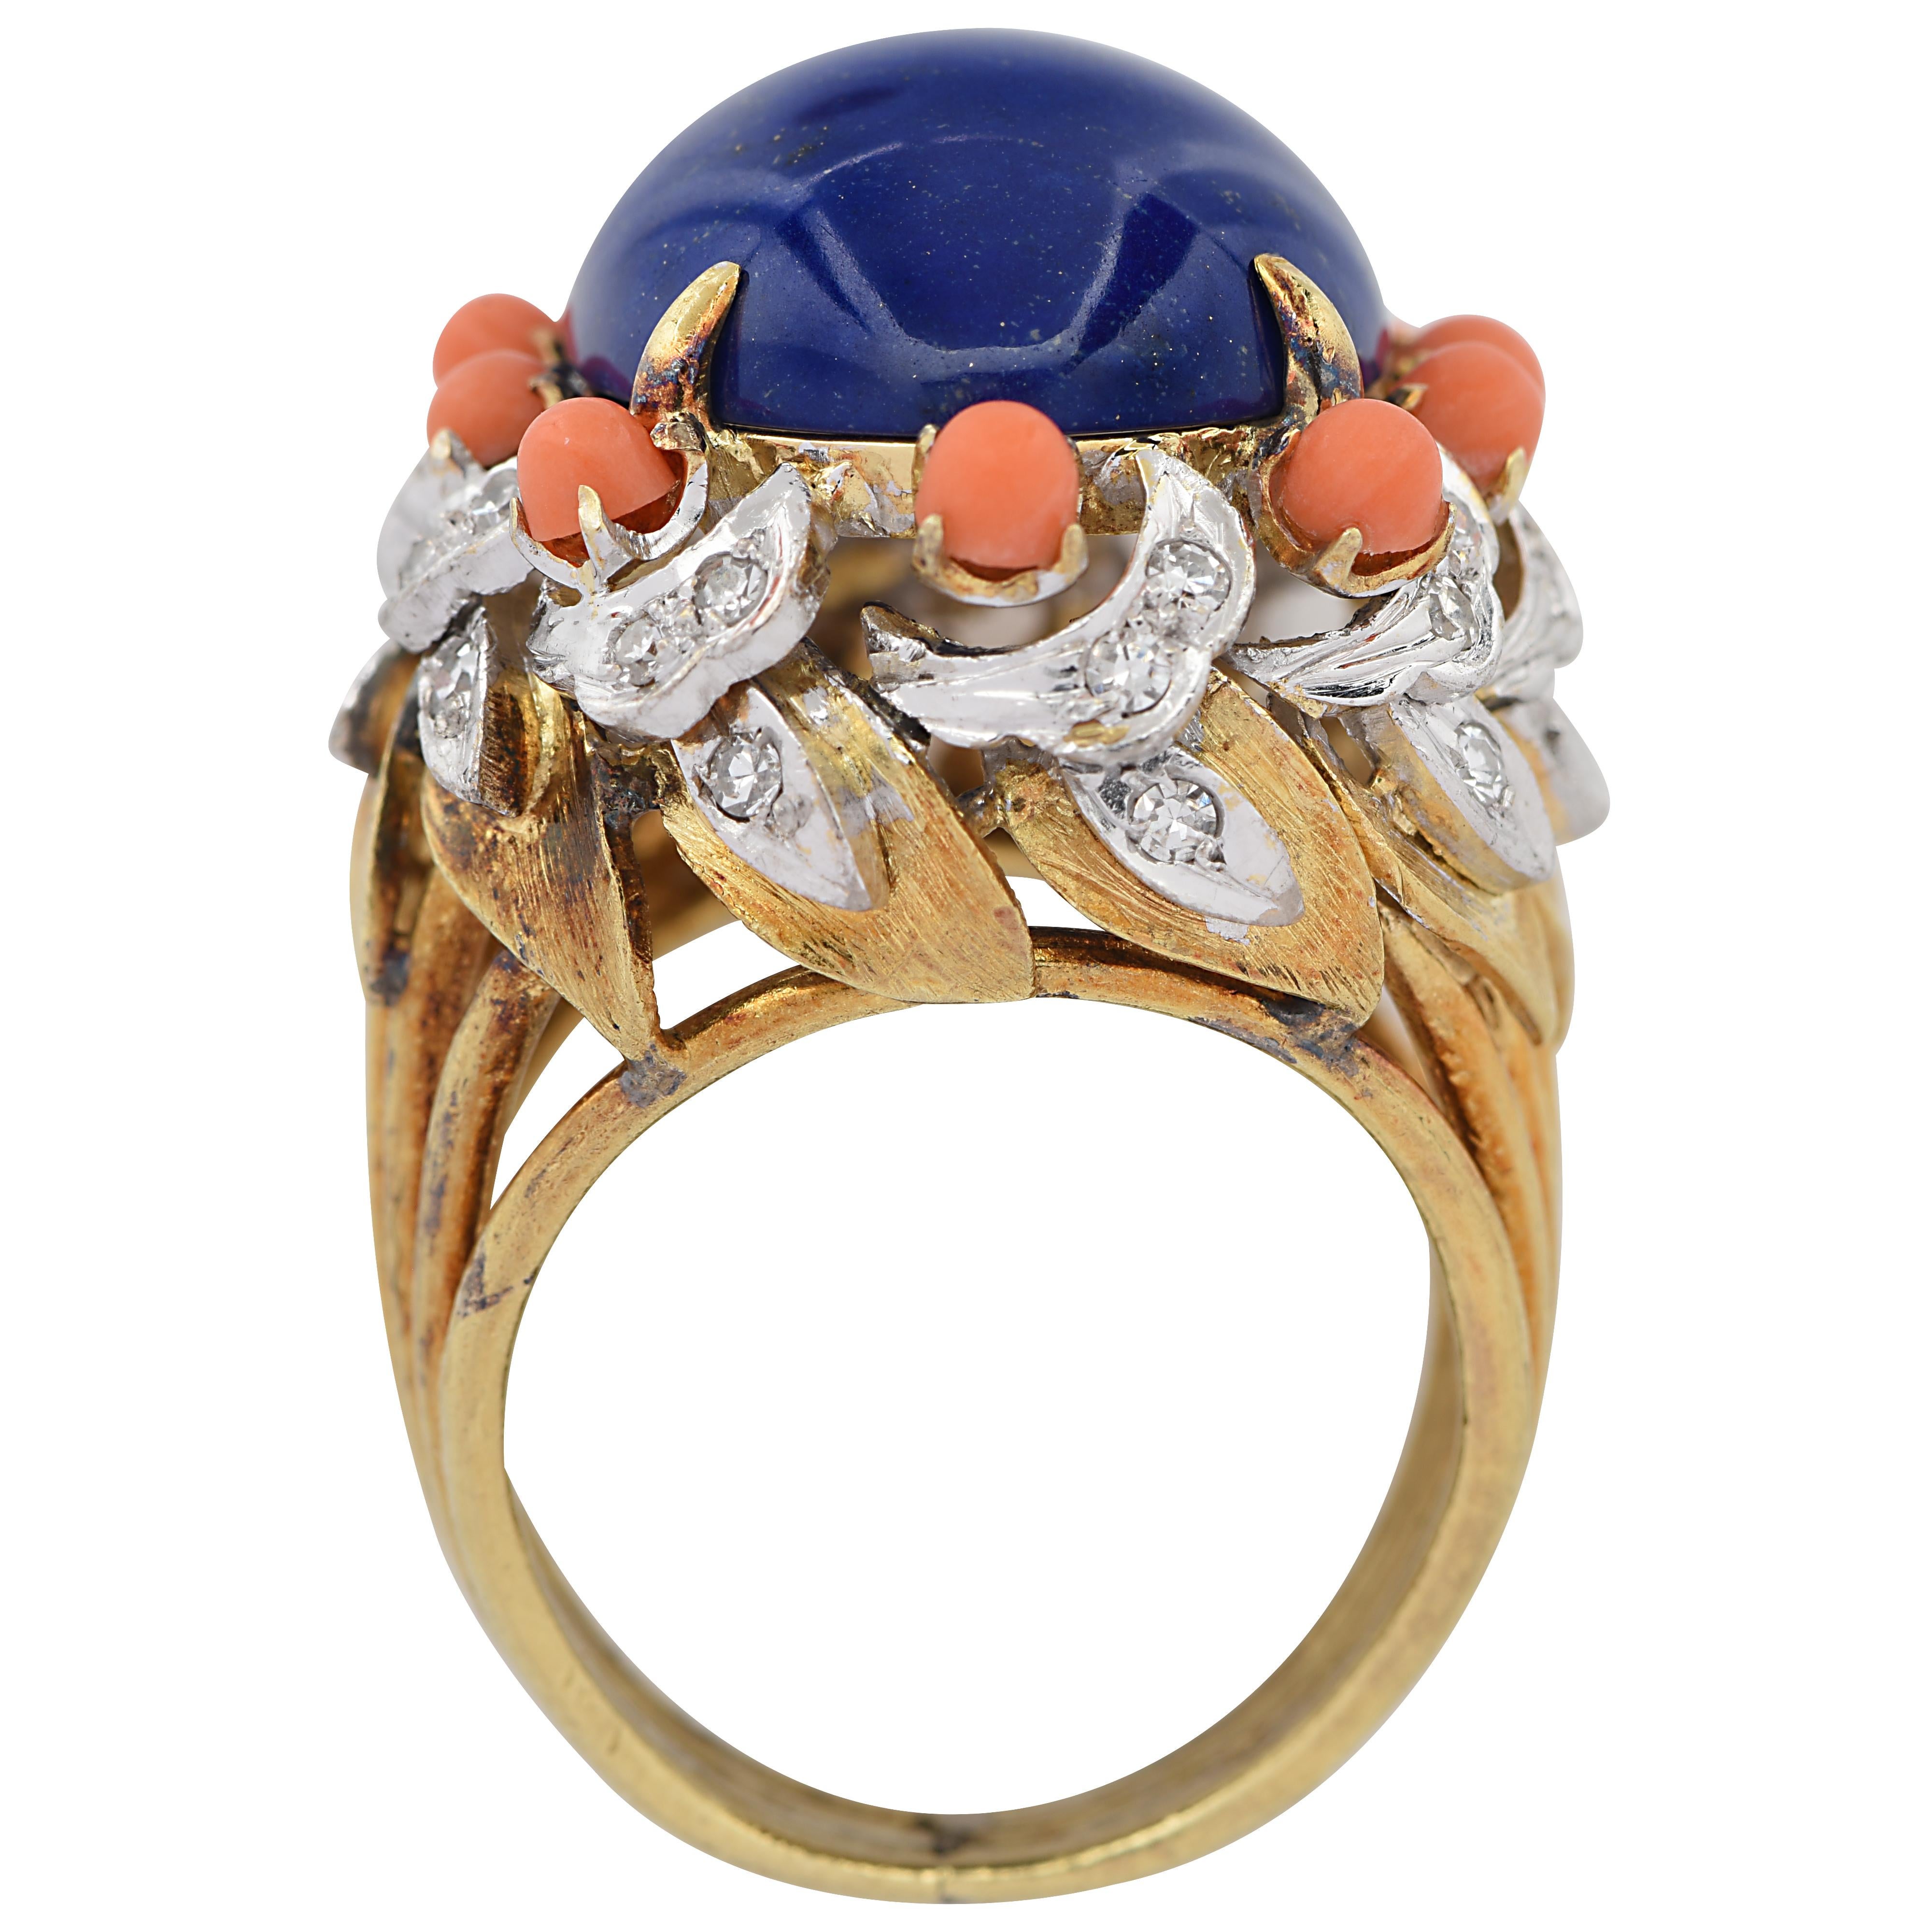 Striking cocktail ring crafted in 18 karat yellow gold showcasing a stunning blue lapis cabochon framed with coral and diamonds. This ring measures 24.95 mm in length, 20.75 mm in width and weighs 17.4 grams. This ornate ring is a size 5.5

Our